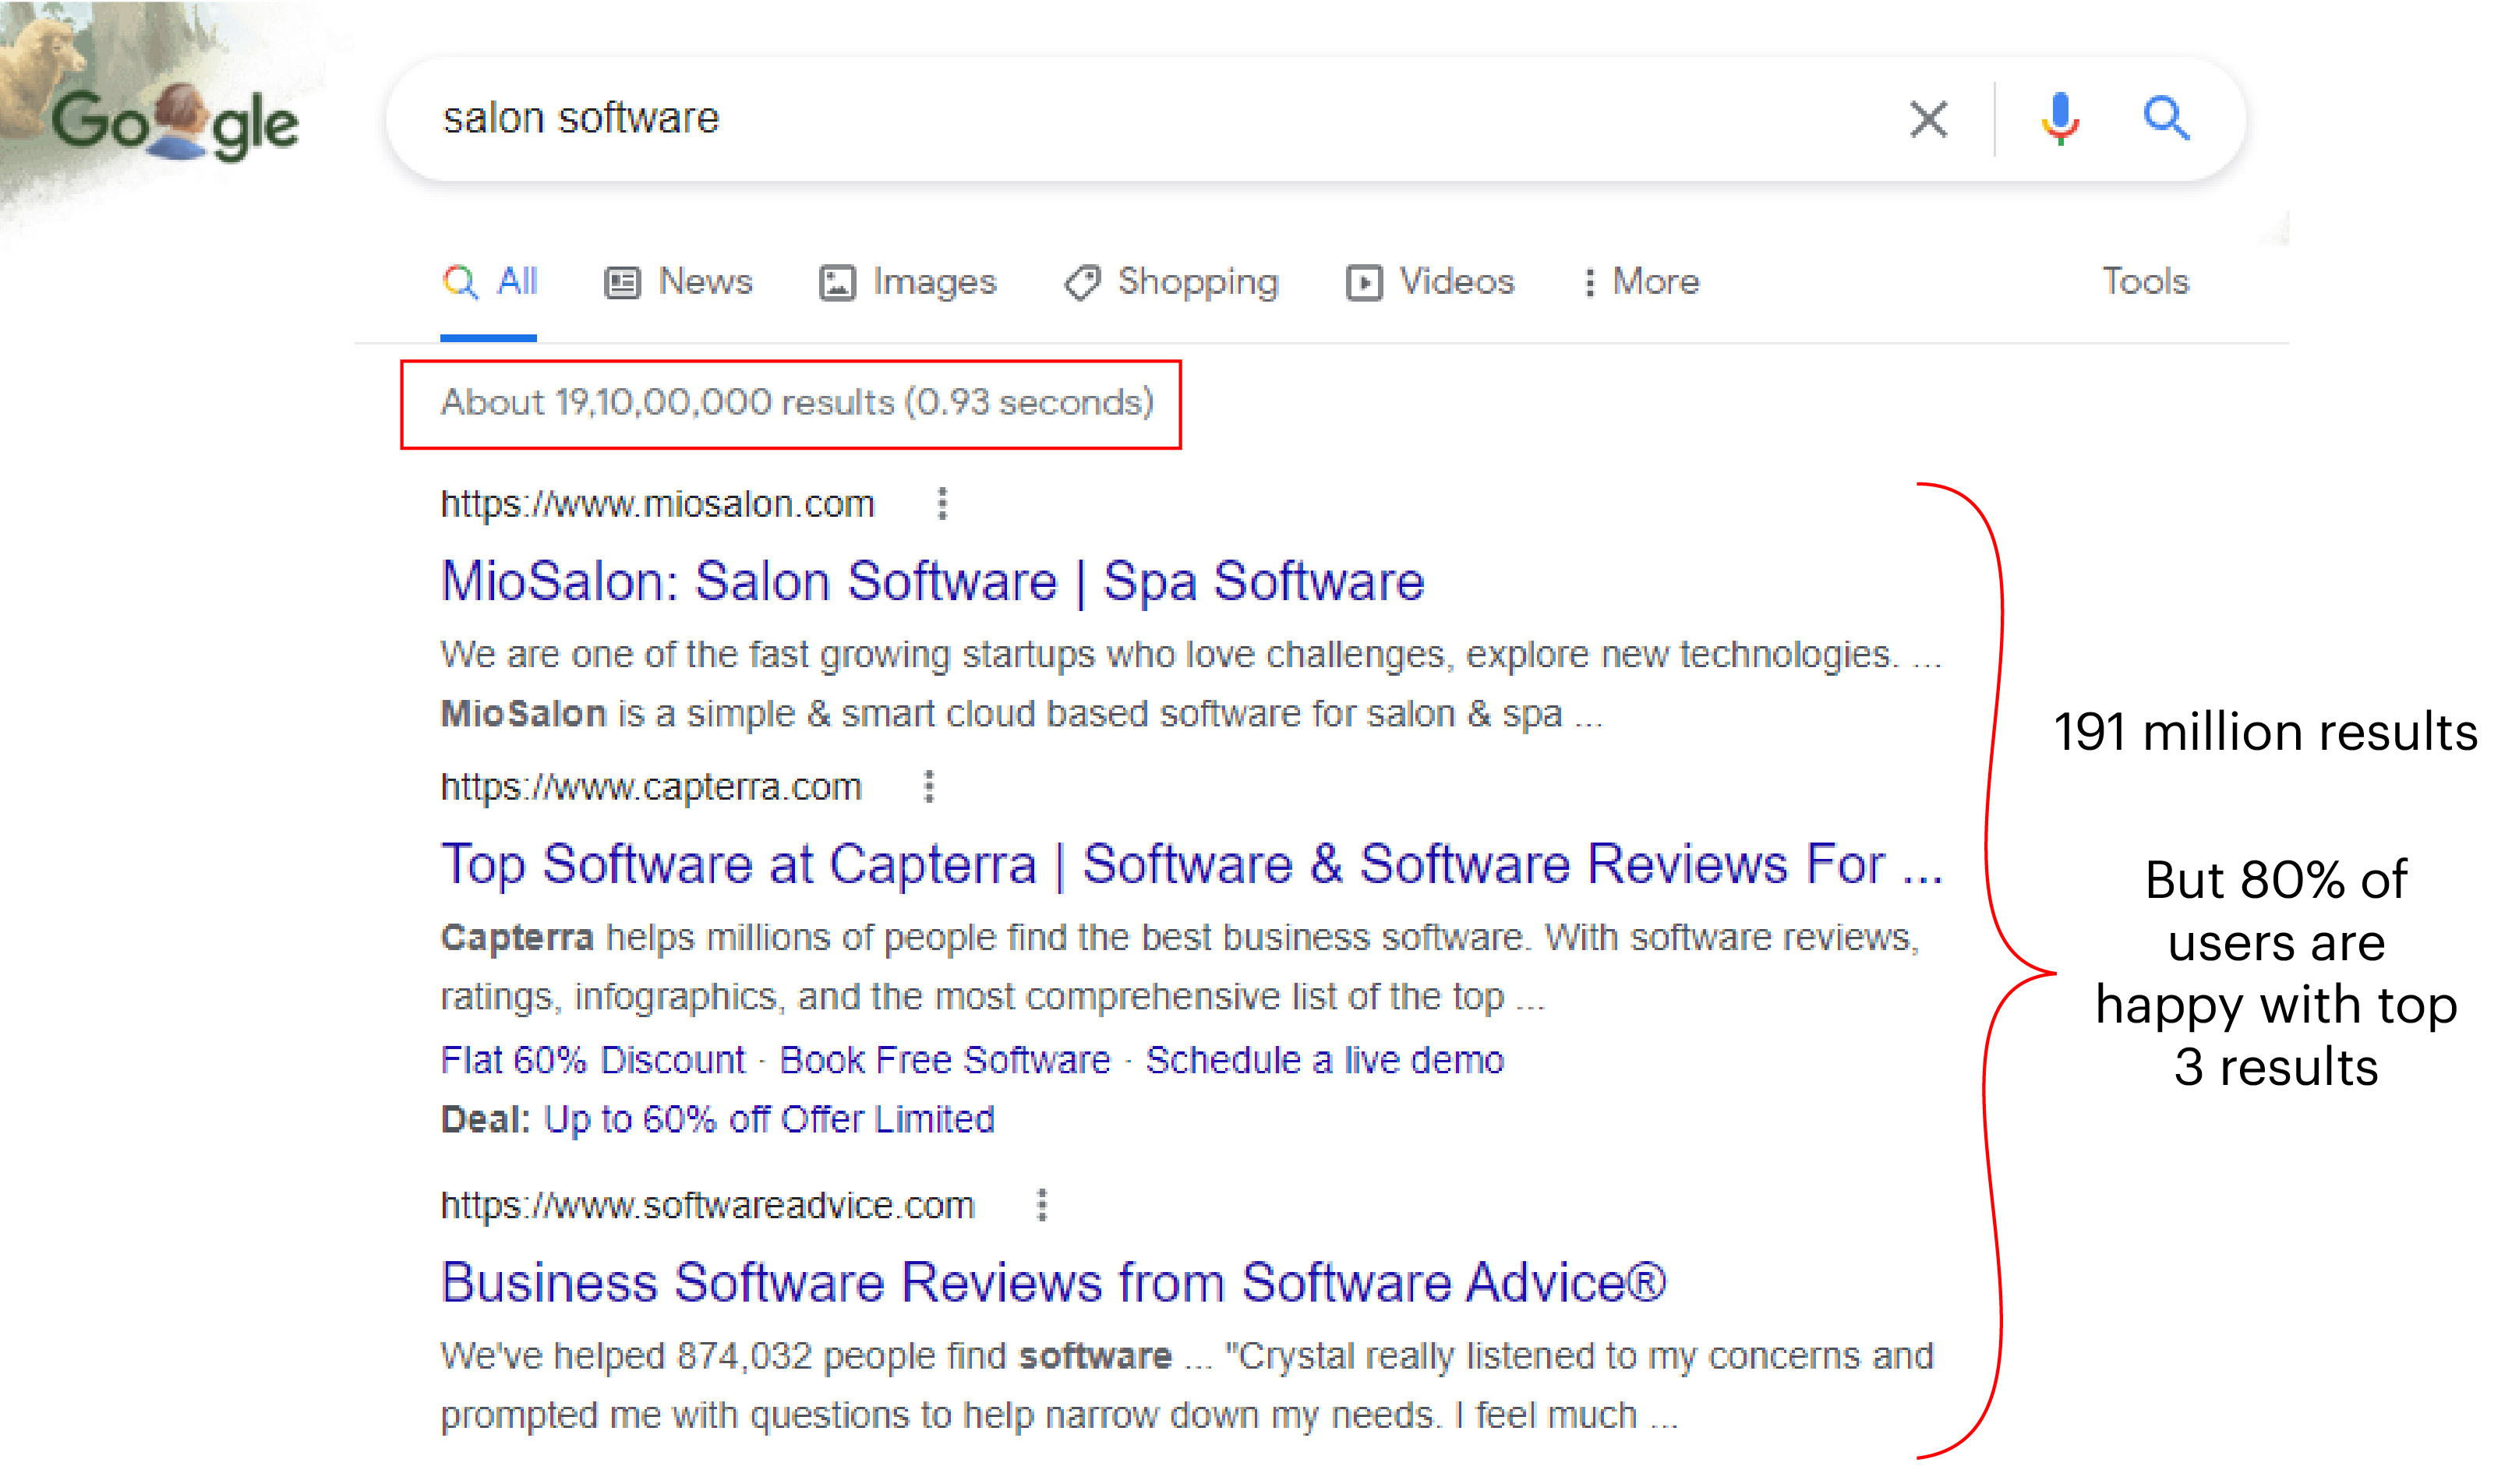 Search results Page for Salon Software